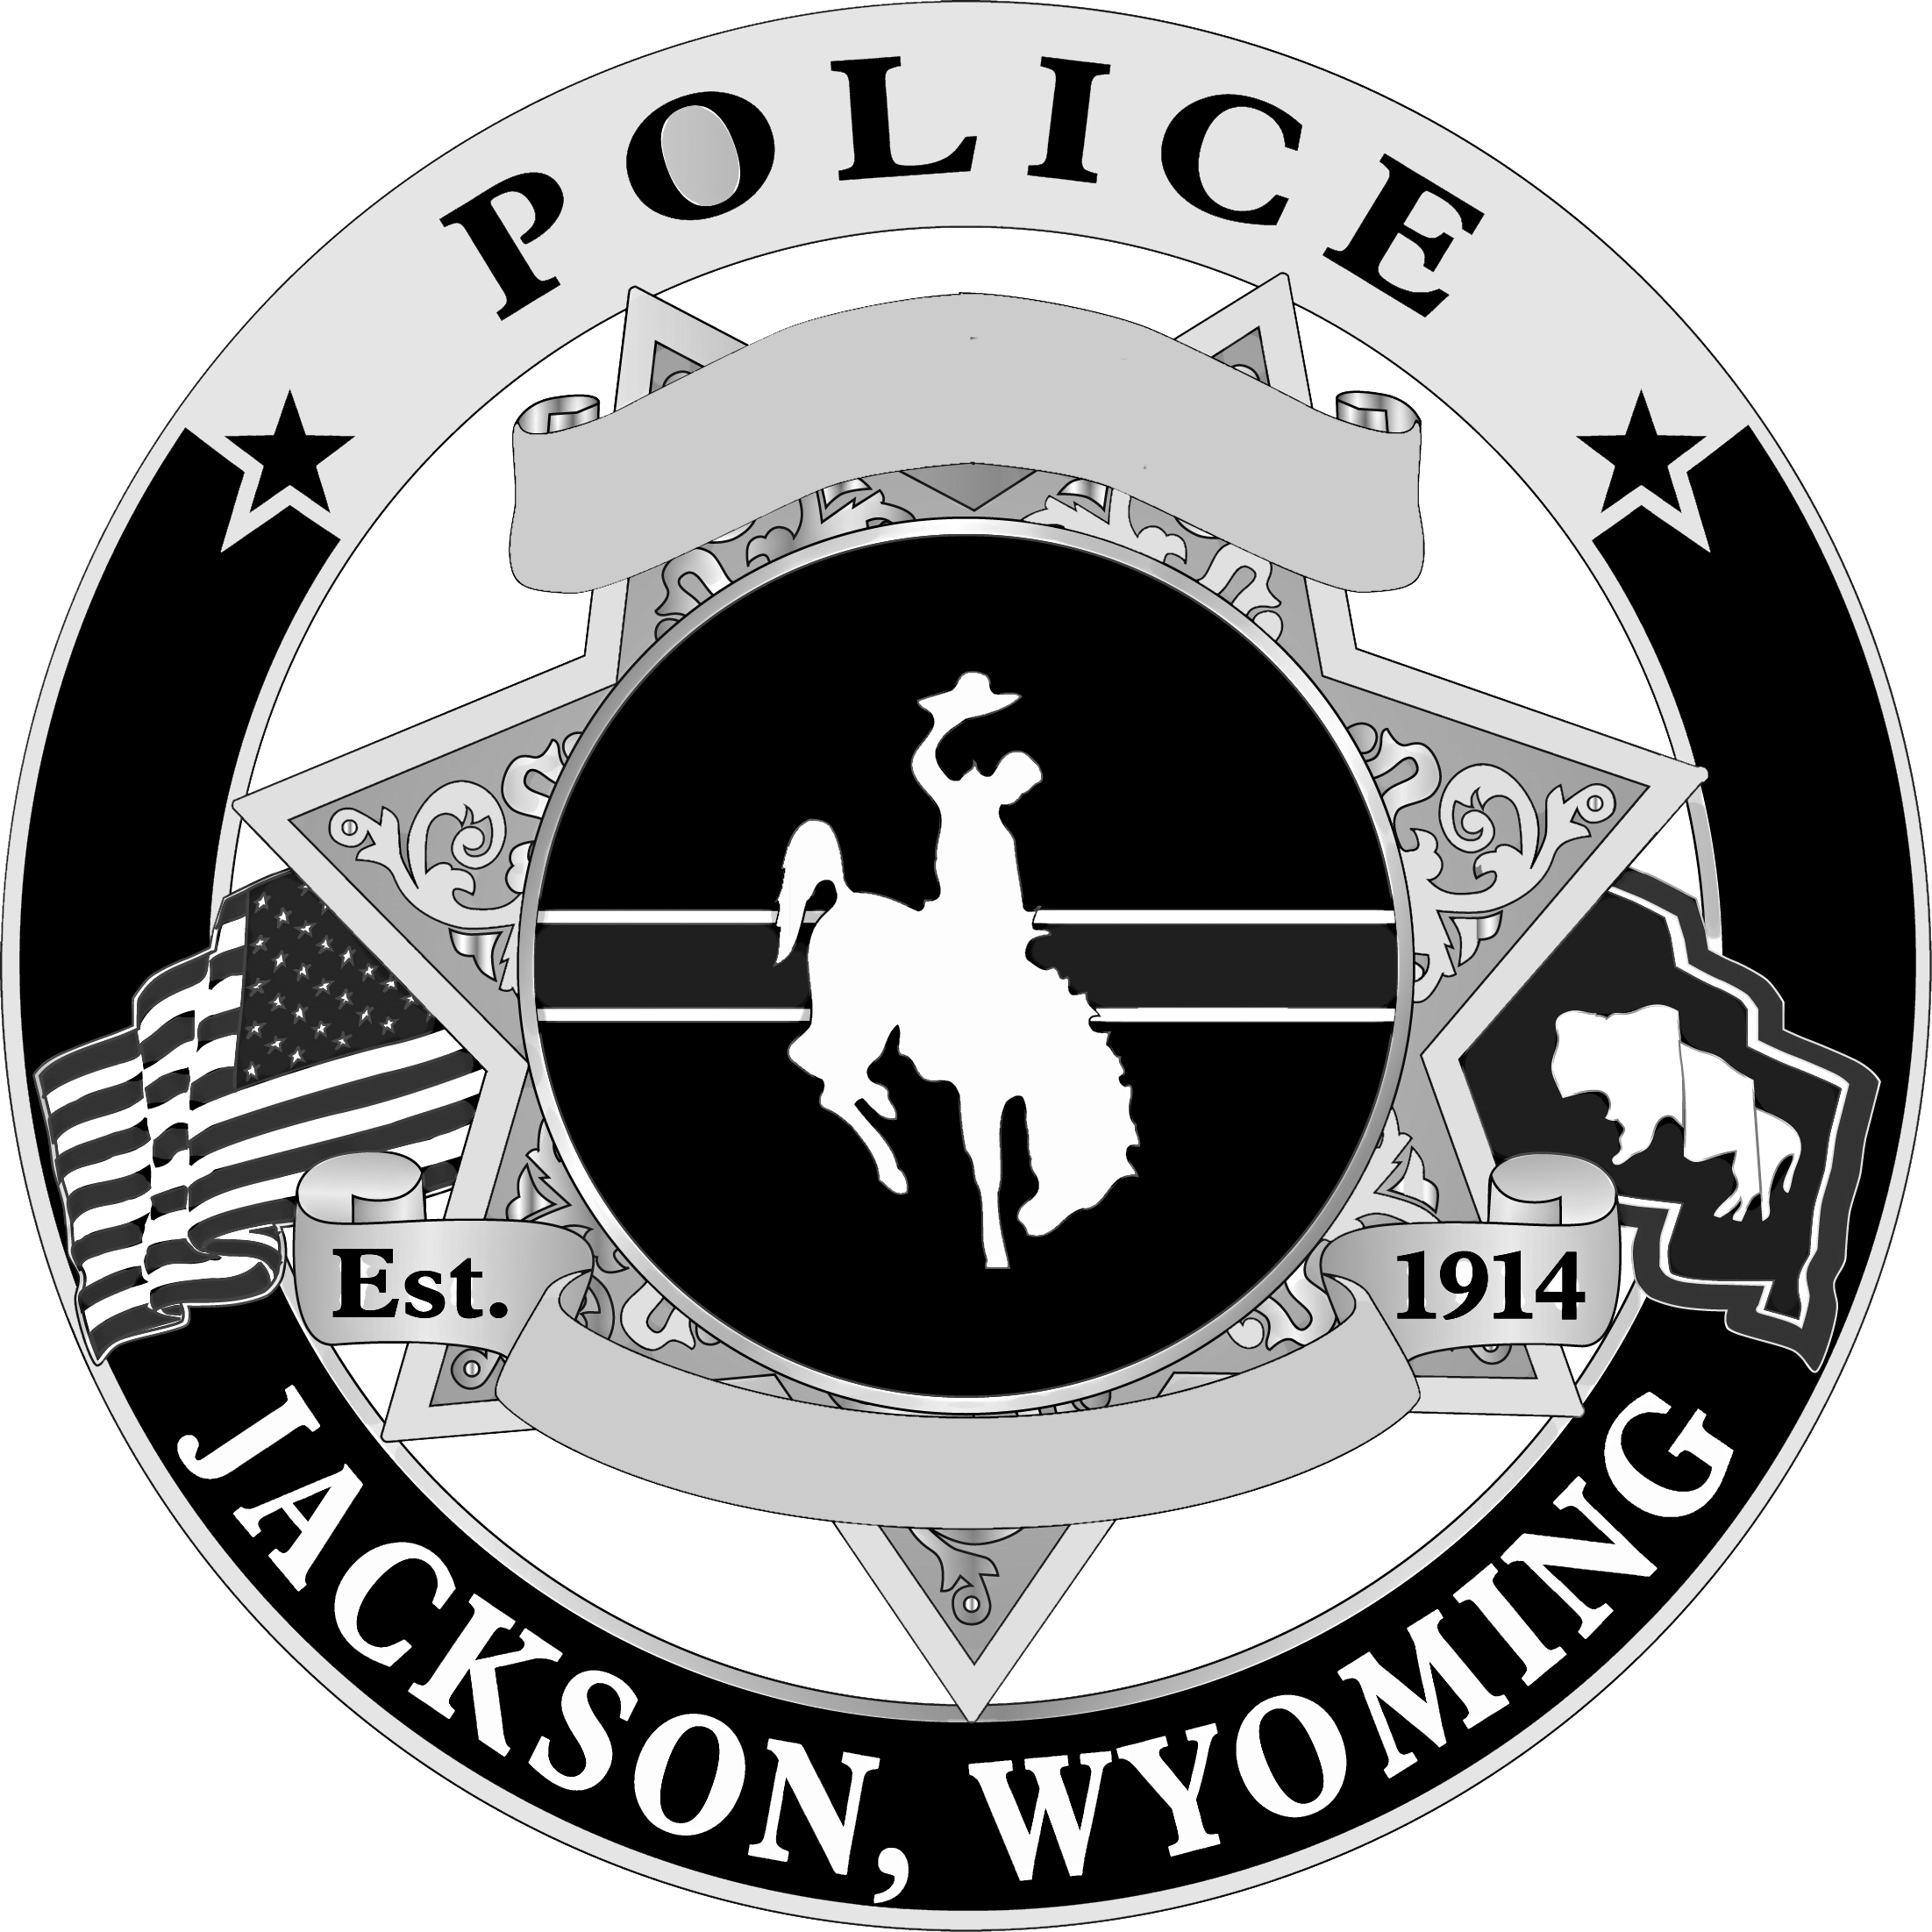 Jackson Police Department, WY 